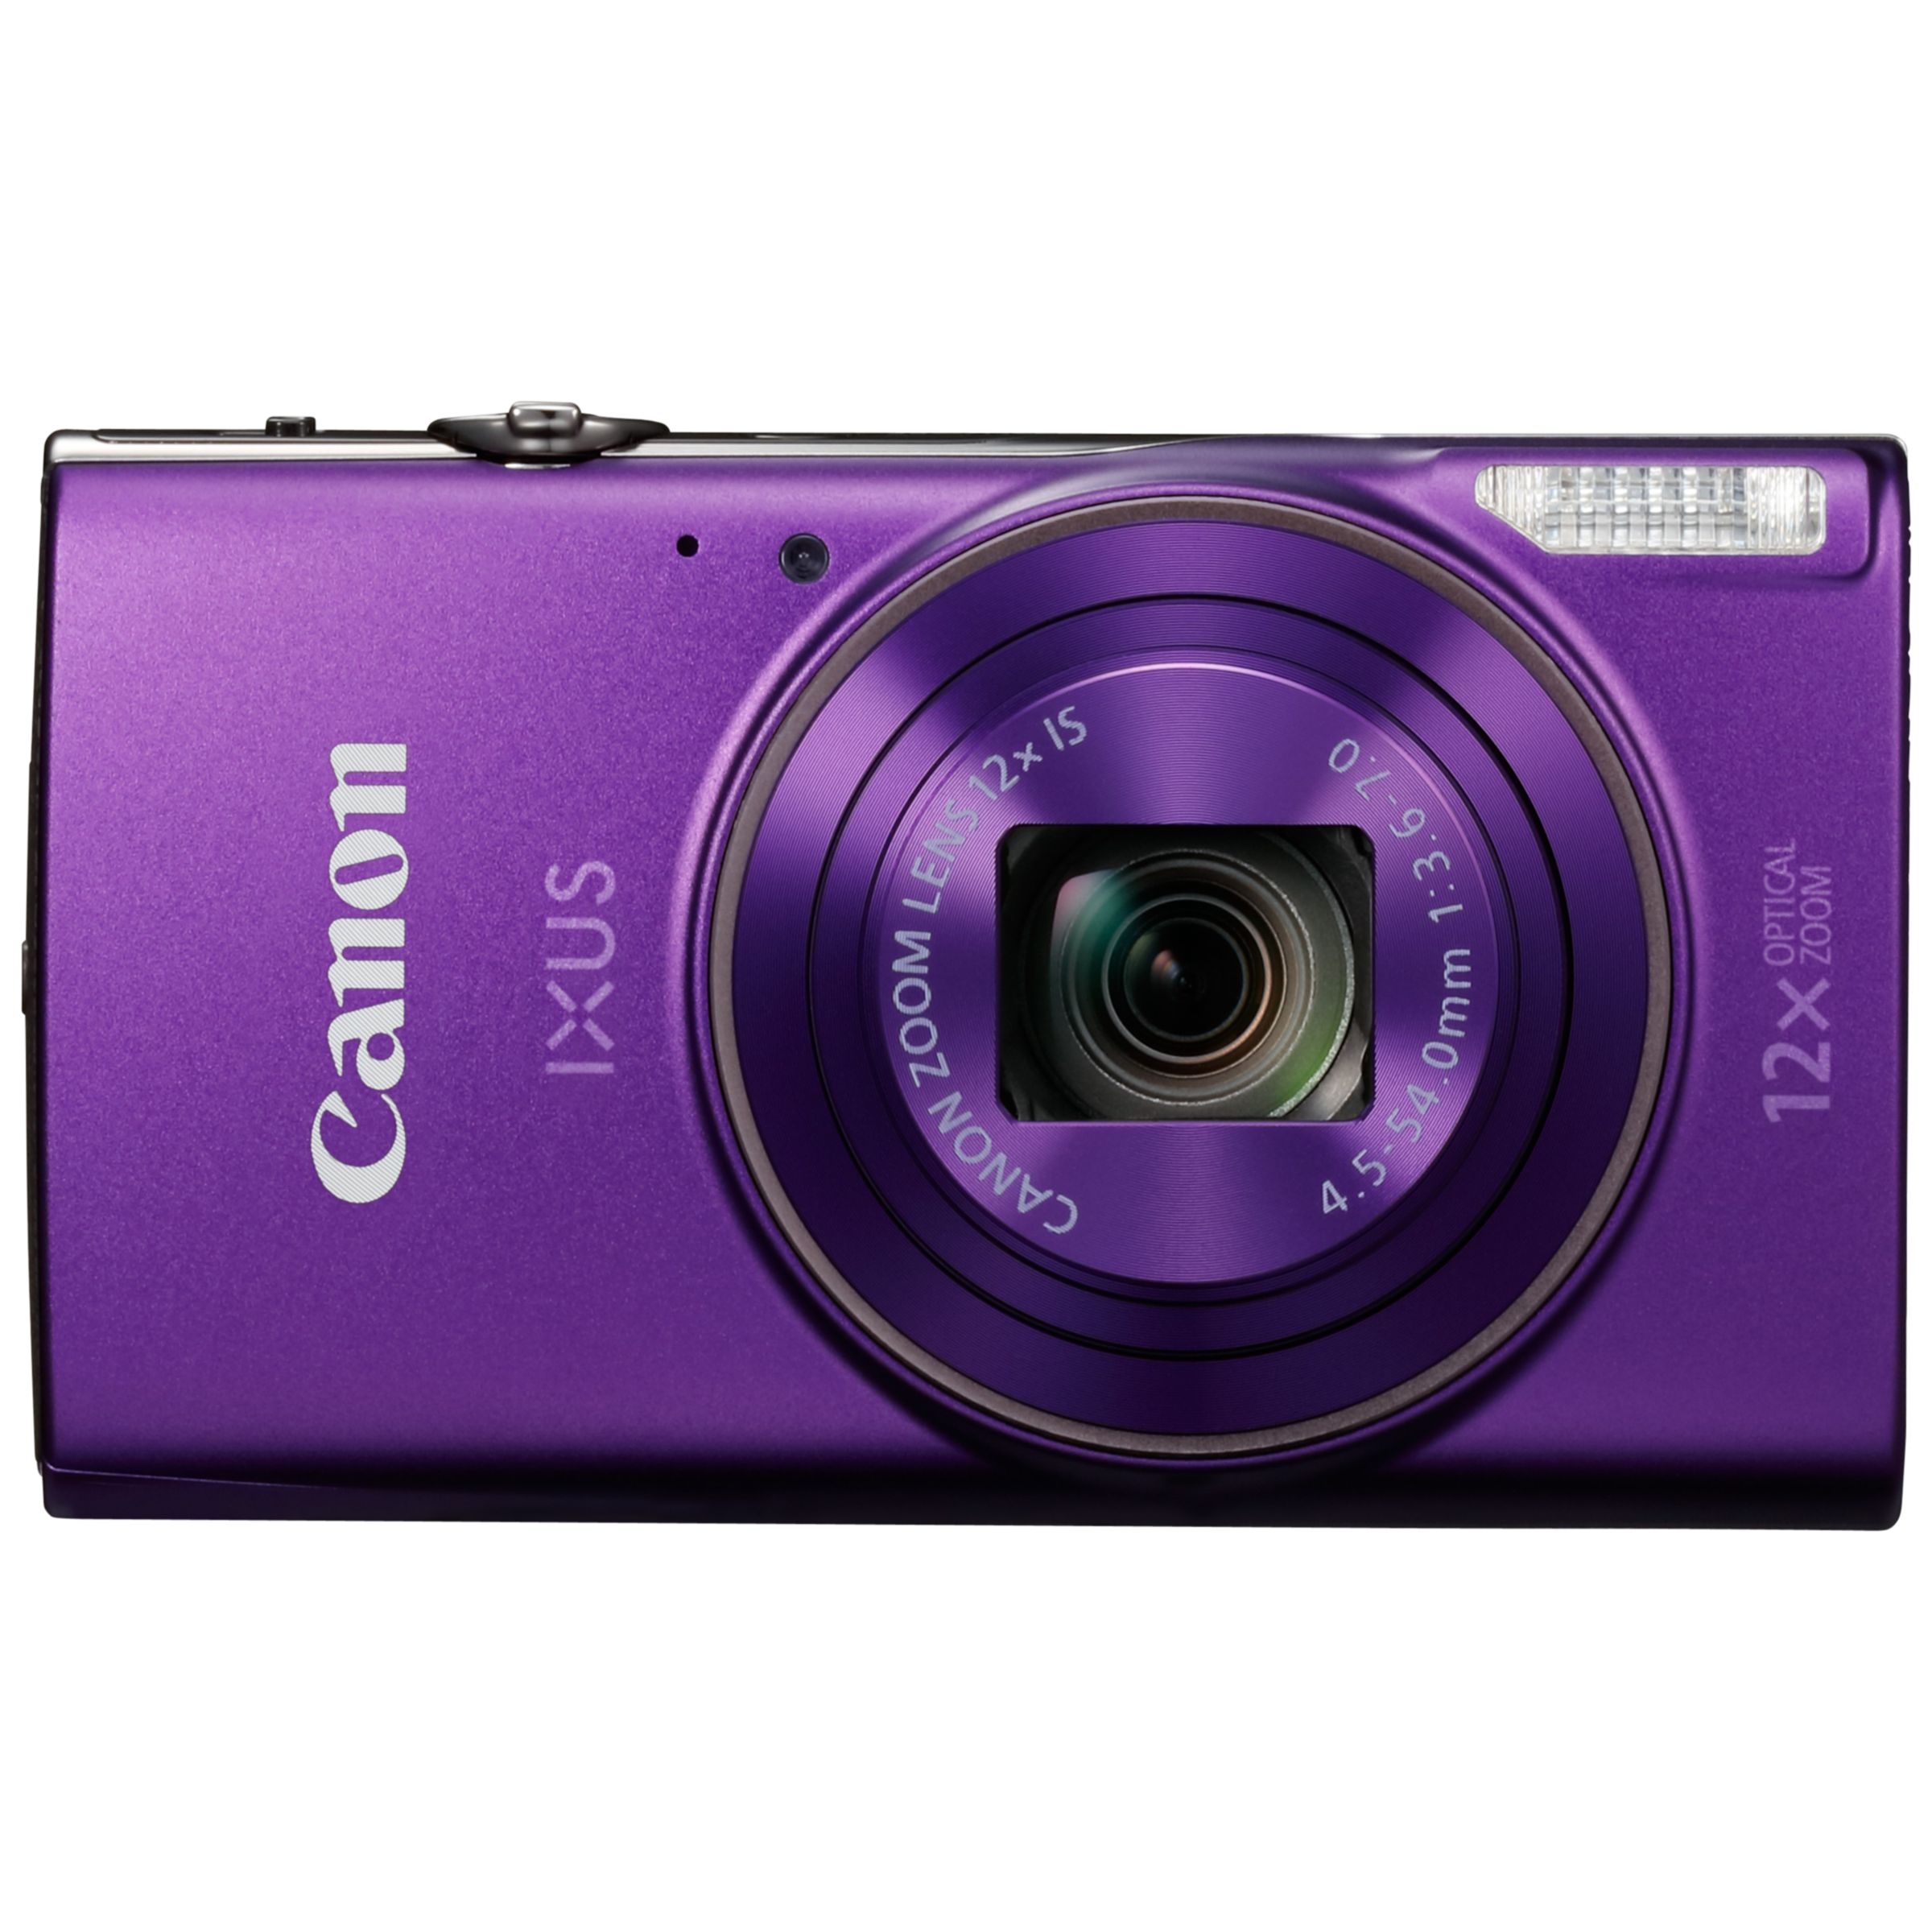 Canon IXUS 285 HS Digital Camera Kit, Full HD 1080p, 20.2MP, 12x Optical Zoom, 24x Zoom Plus, Wi-Fi, NFC, 3 LCD Screen With Leather Case & 16GB SD Card